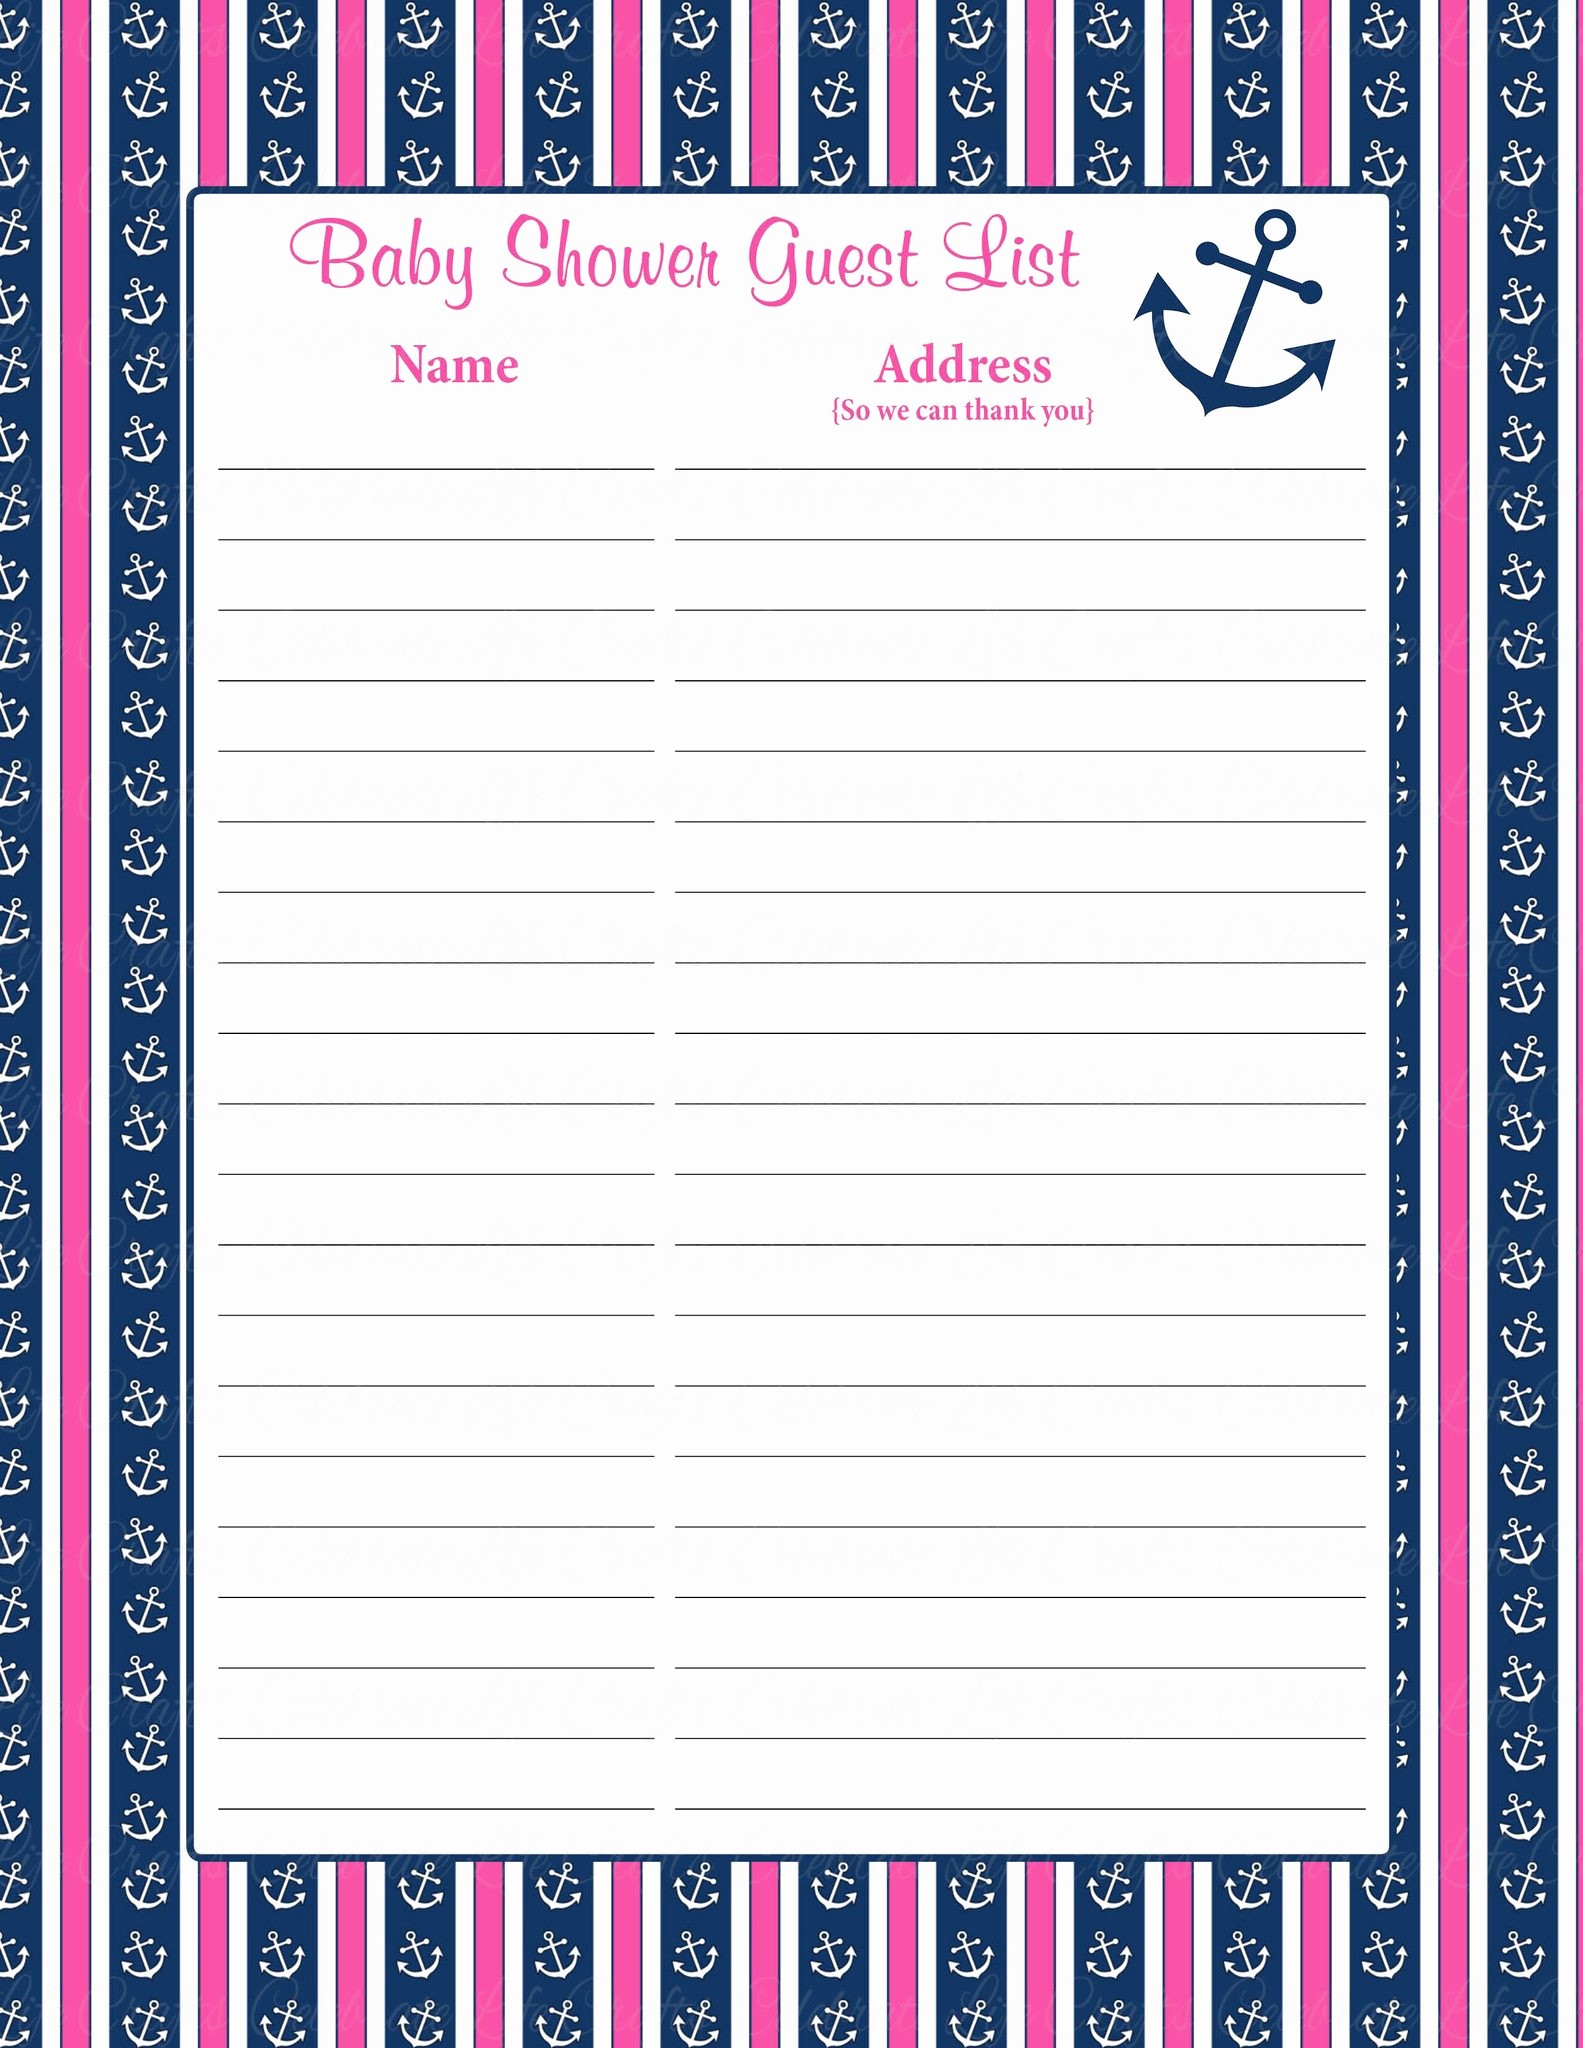 Baby Shower Guest List Printable Lovely Printable Baby Shower Guest List Portablegasgrillweber